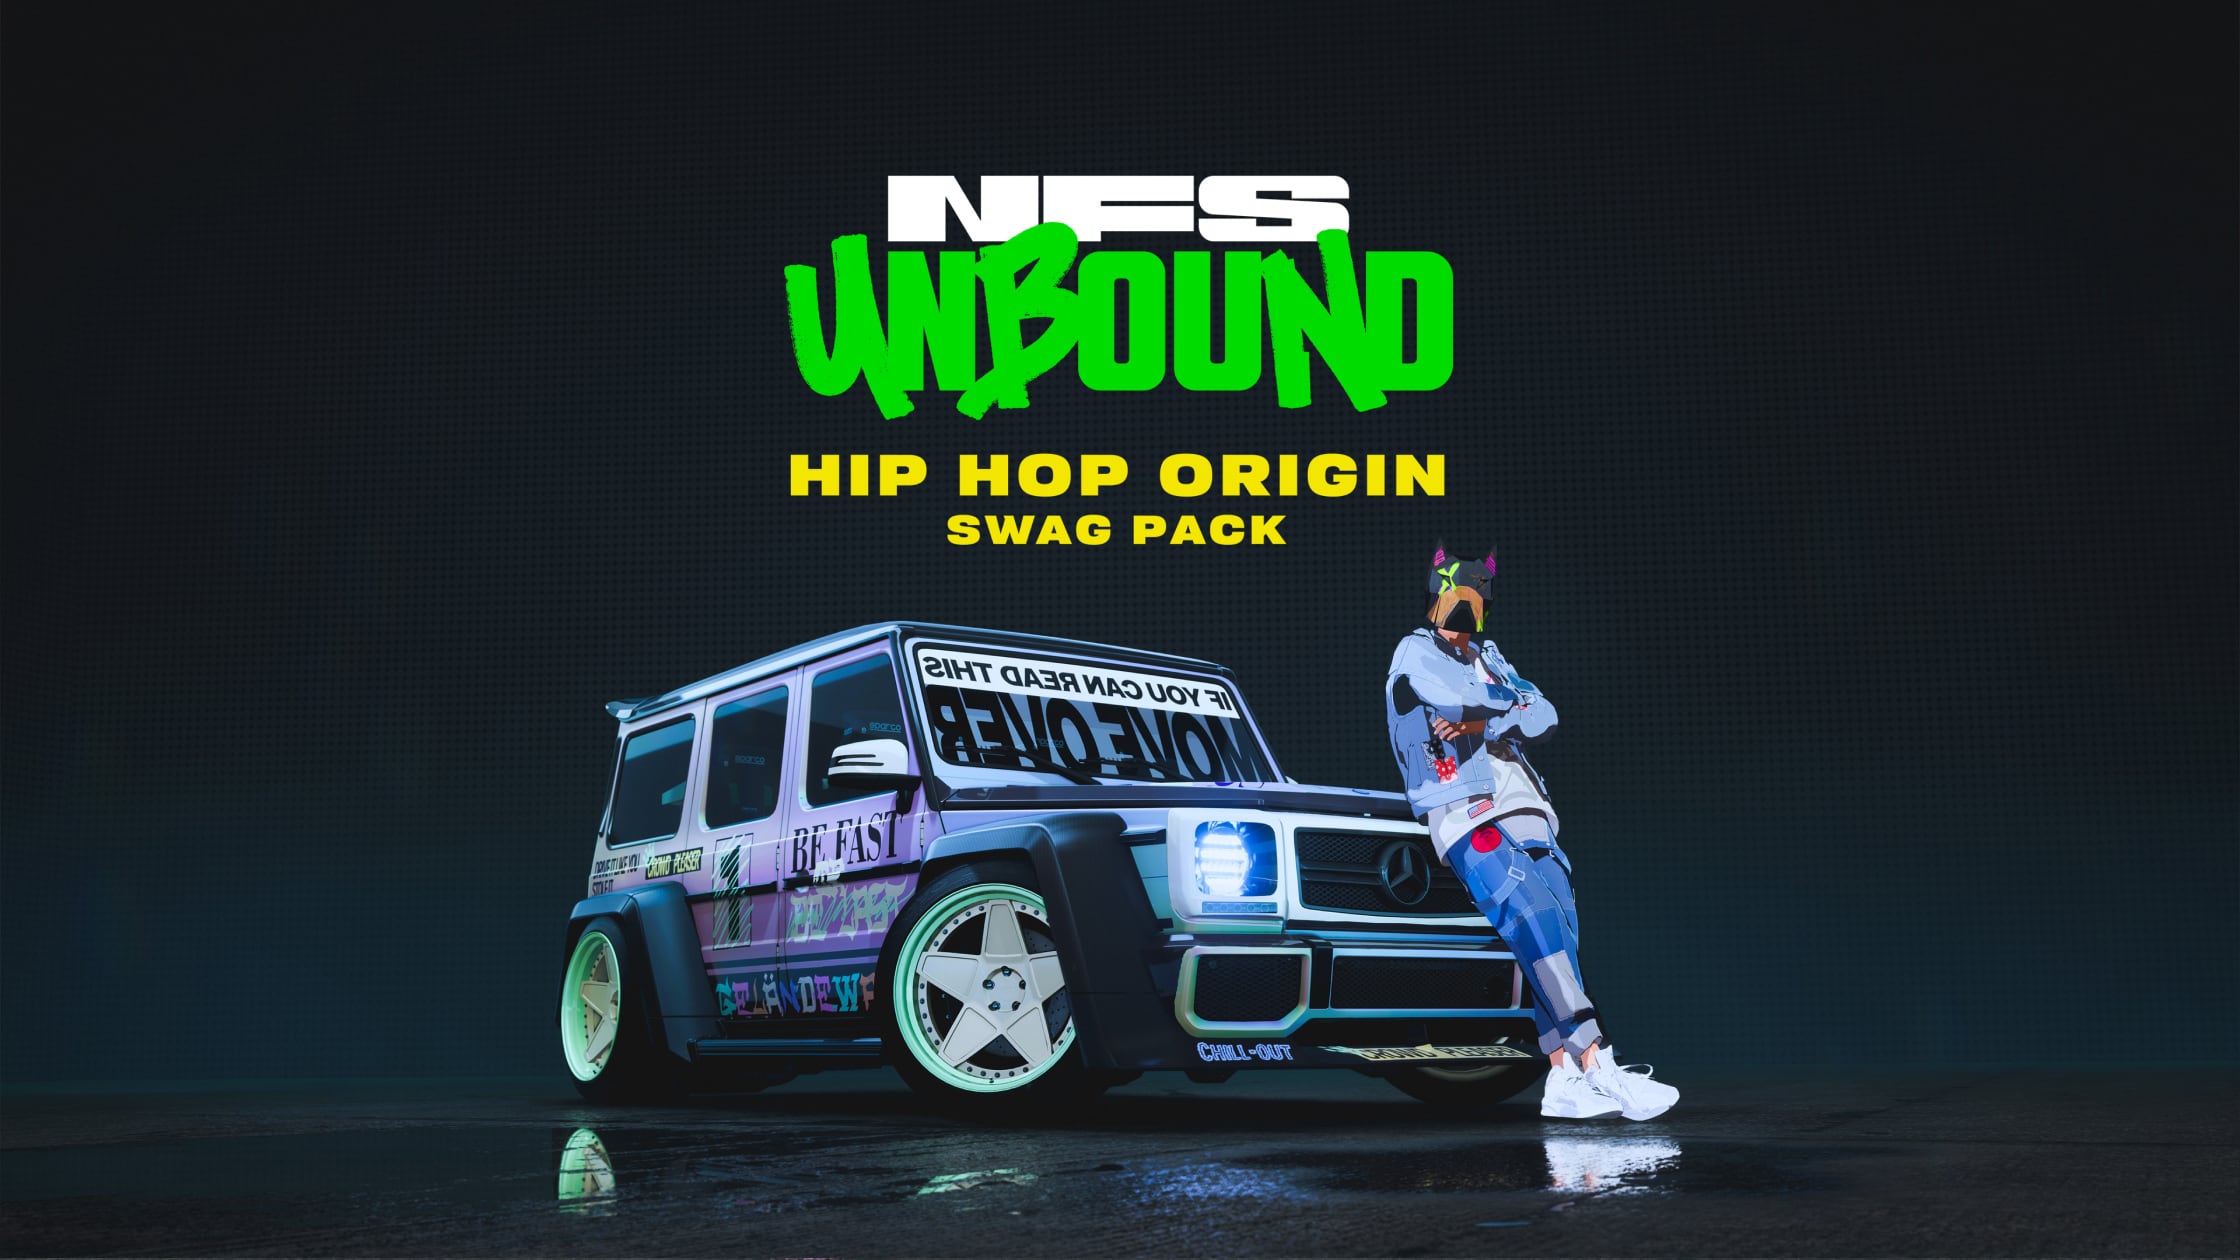 NFS - Need for Speed Unbound Vol 4 Hip Hop